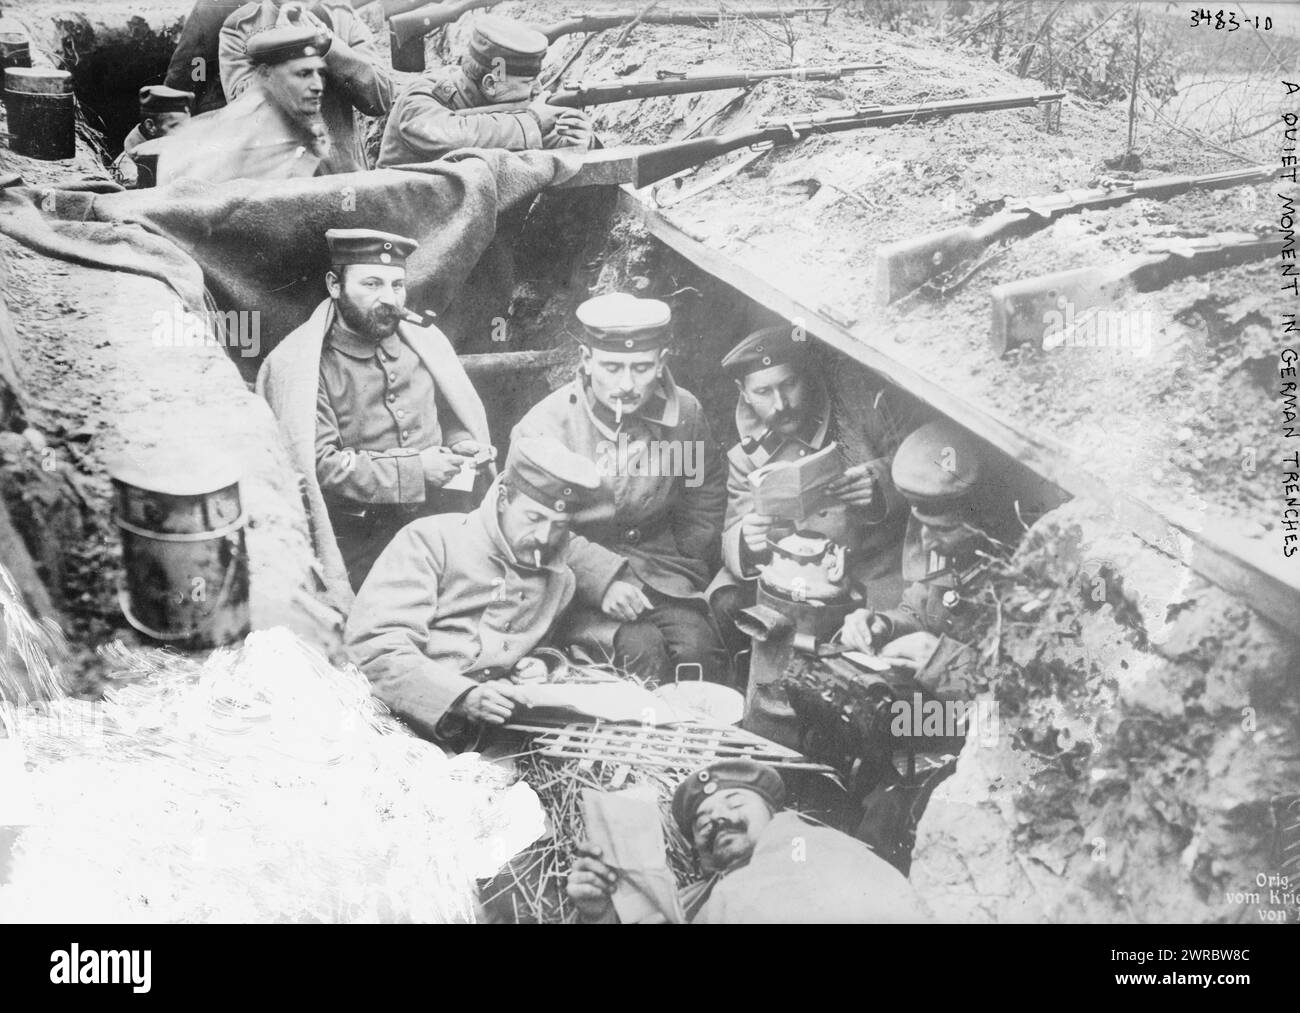 A quiet moment in German trenches, Photograph shows German soldiers smoking and reading in a trench in Flanders, Belgium, during World War I., between 1914 and ca. 1915, World War, 1914-1918, Glass negatives, 1 negative: glass Stock Photo